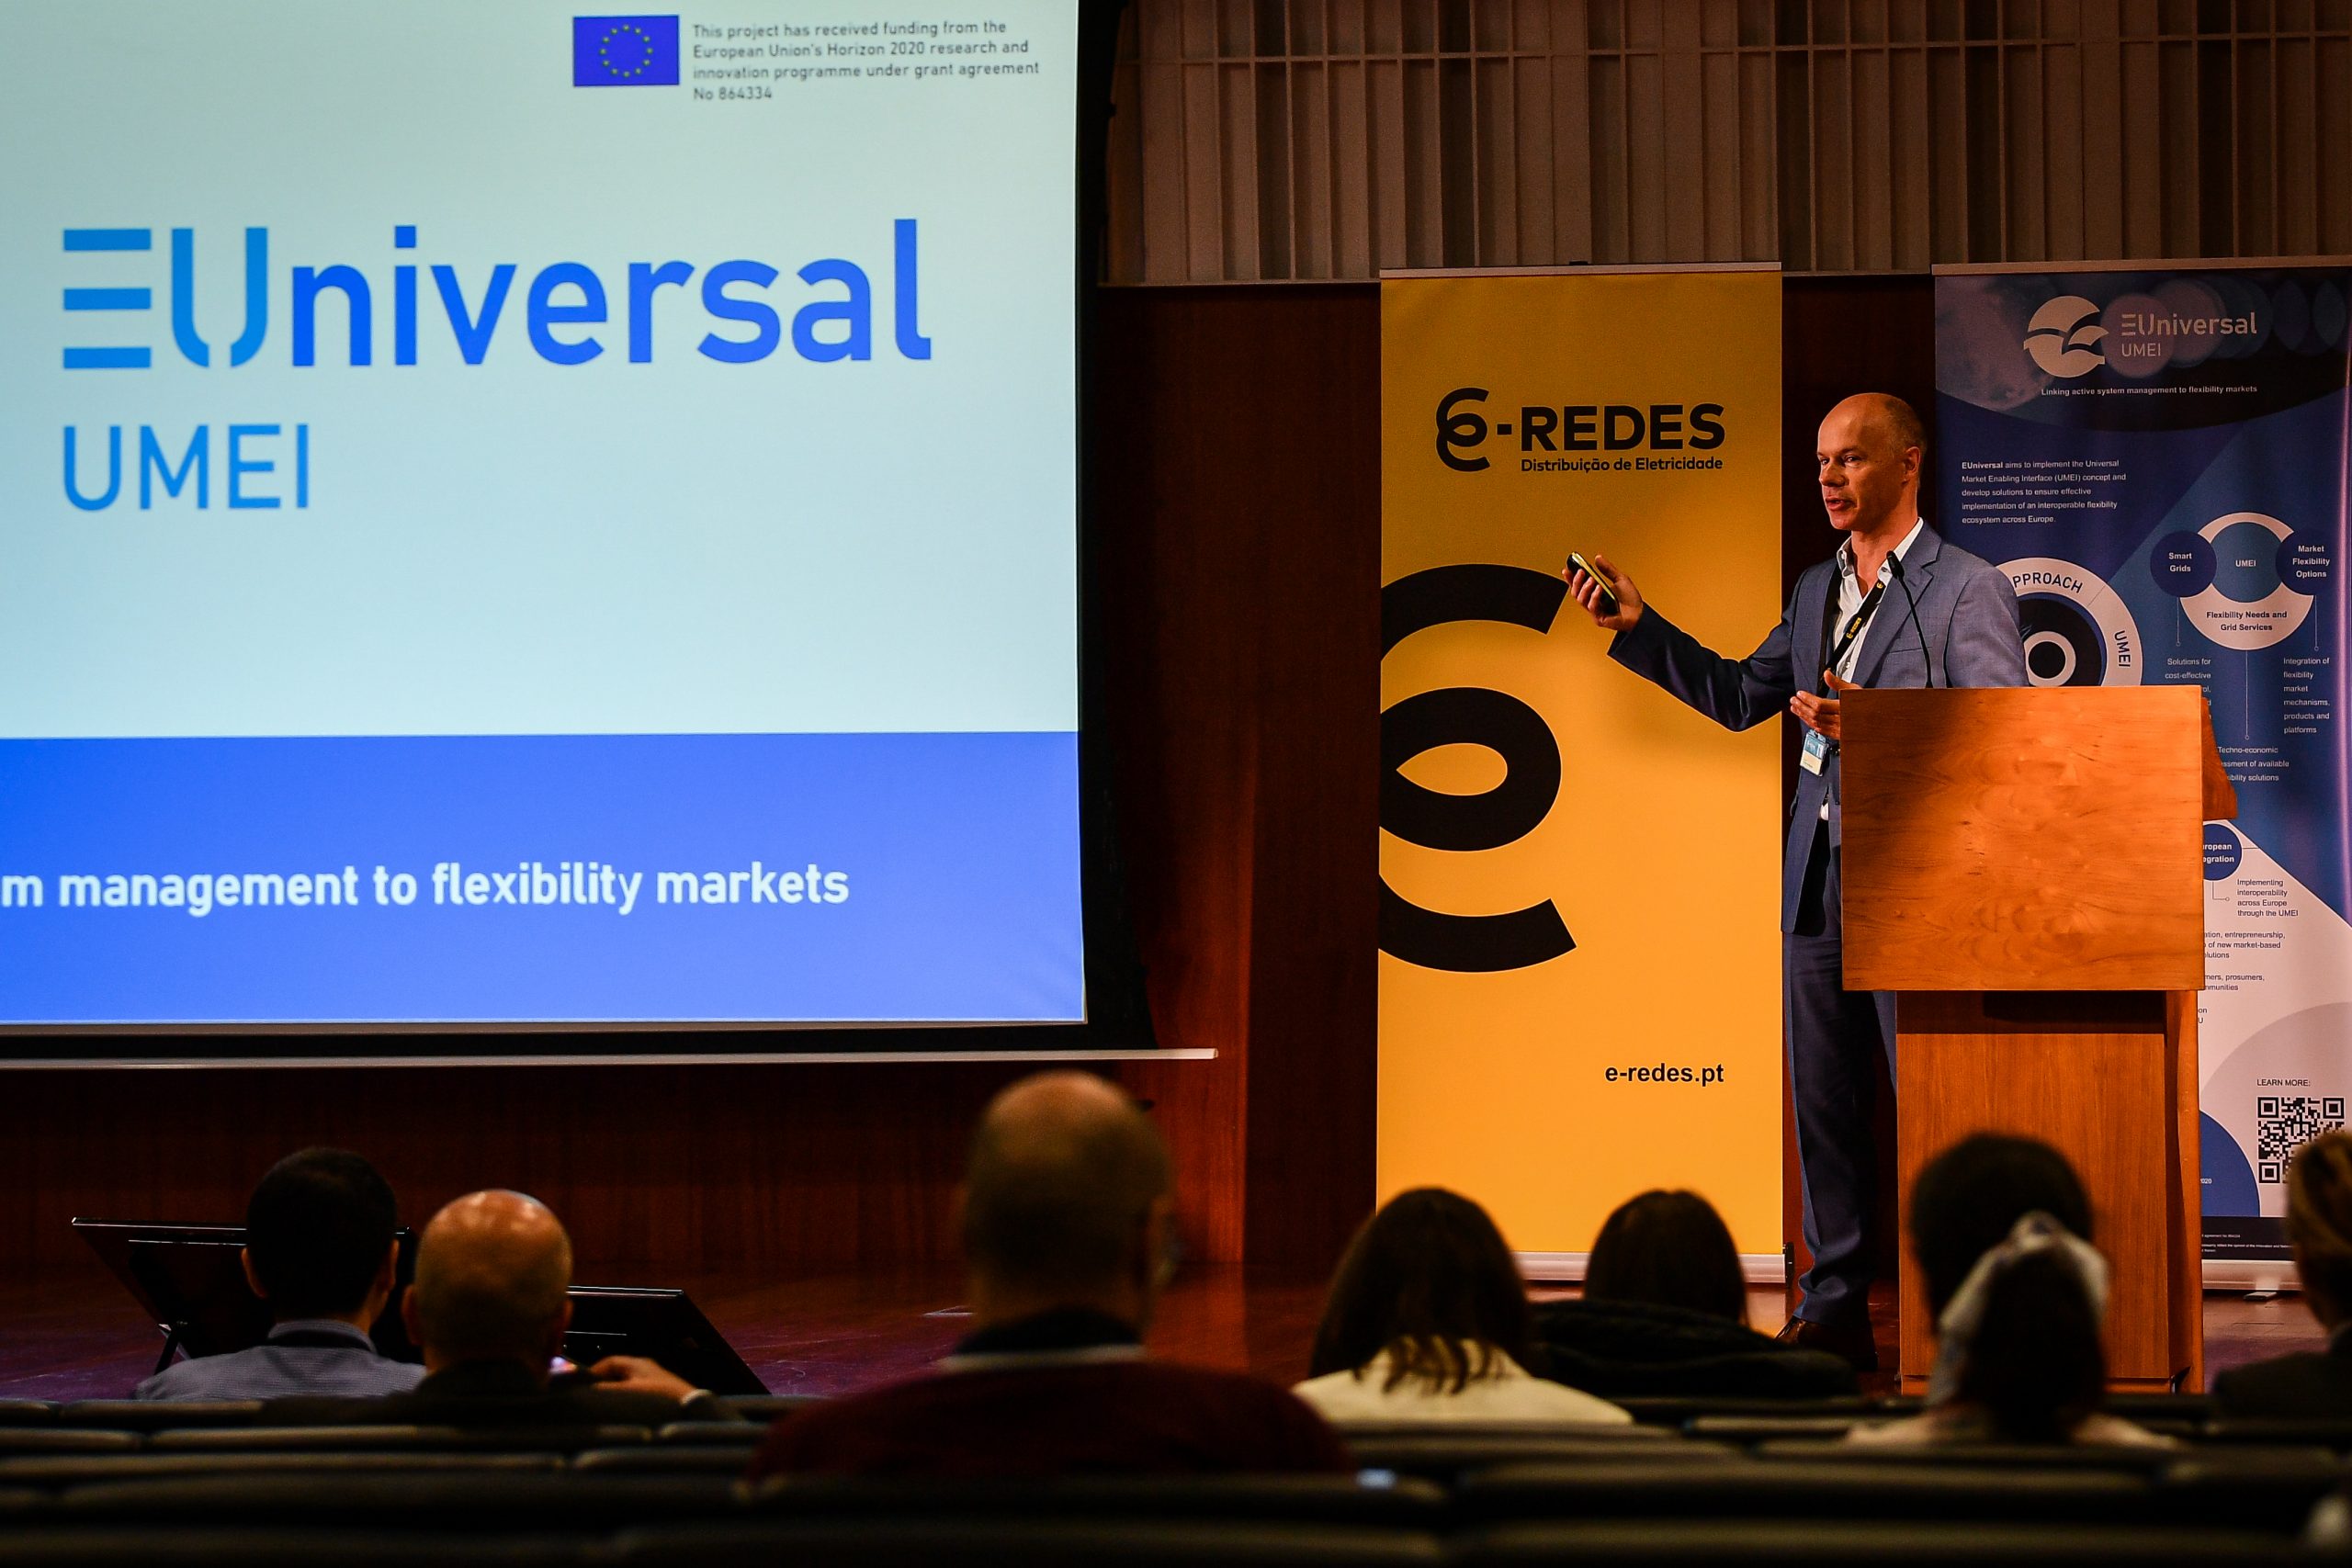 EUniversal at E-REDES event on Flexibility